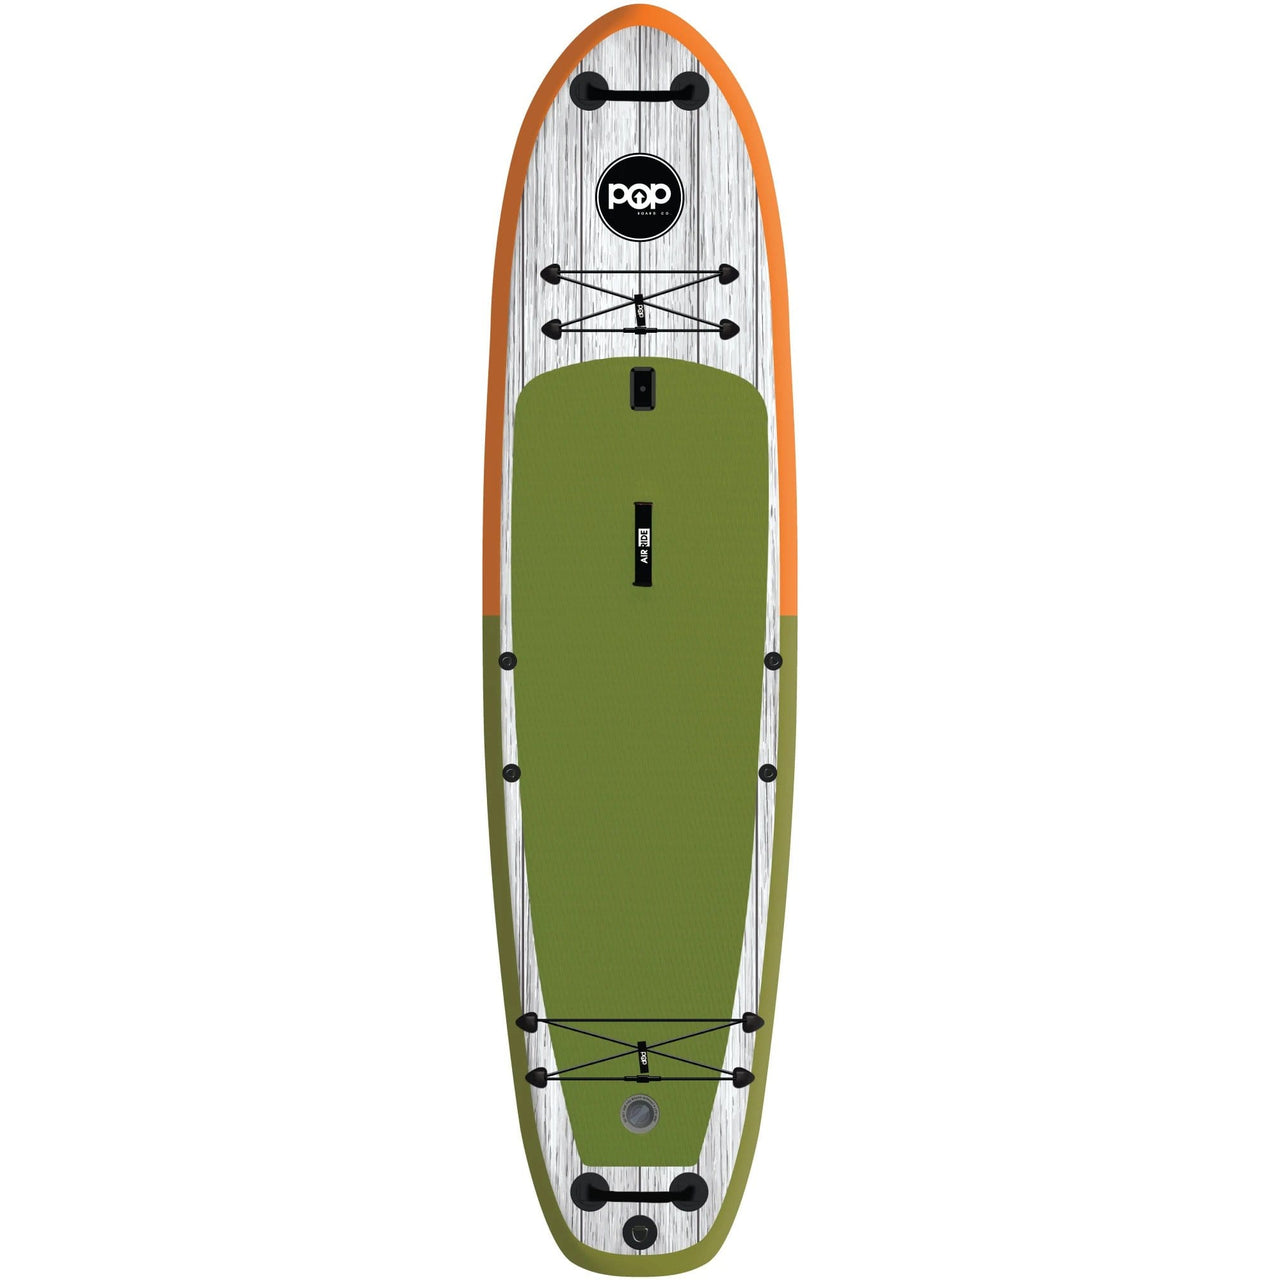 POP Board Co 11'6" El Capitán Stand Up Paddle Board - Orange/Green - Good Wave Canada